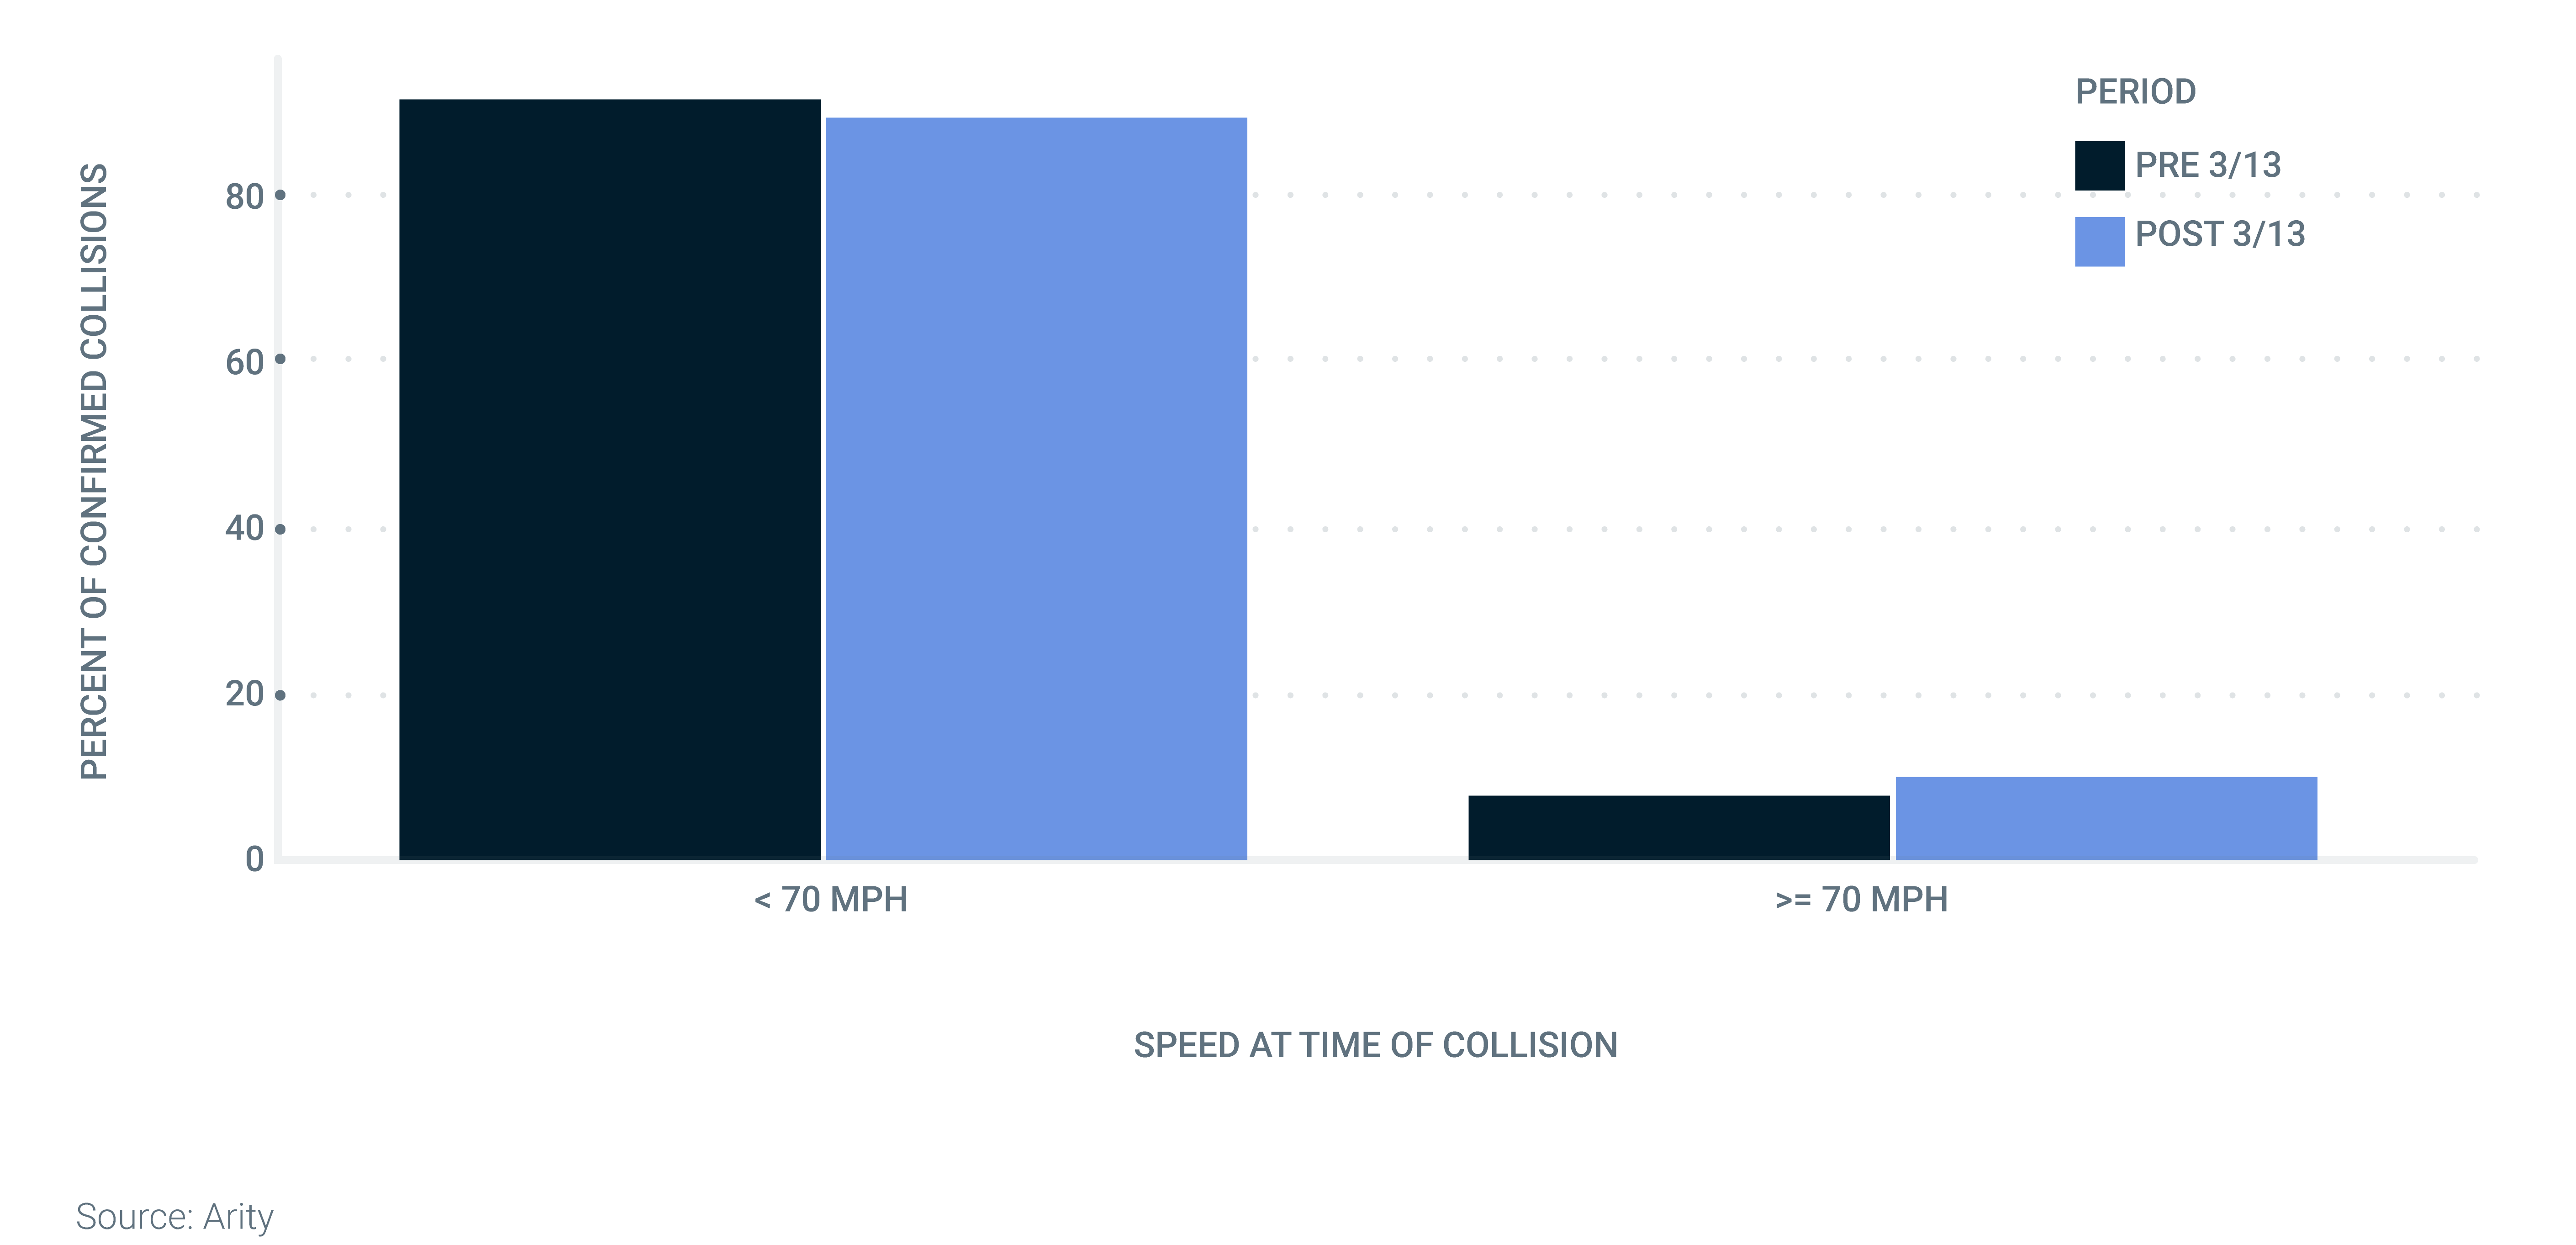 Bar chart showing speed at time of collision before March 13, 2020 and after March 13, 2020